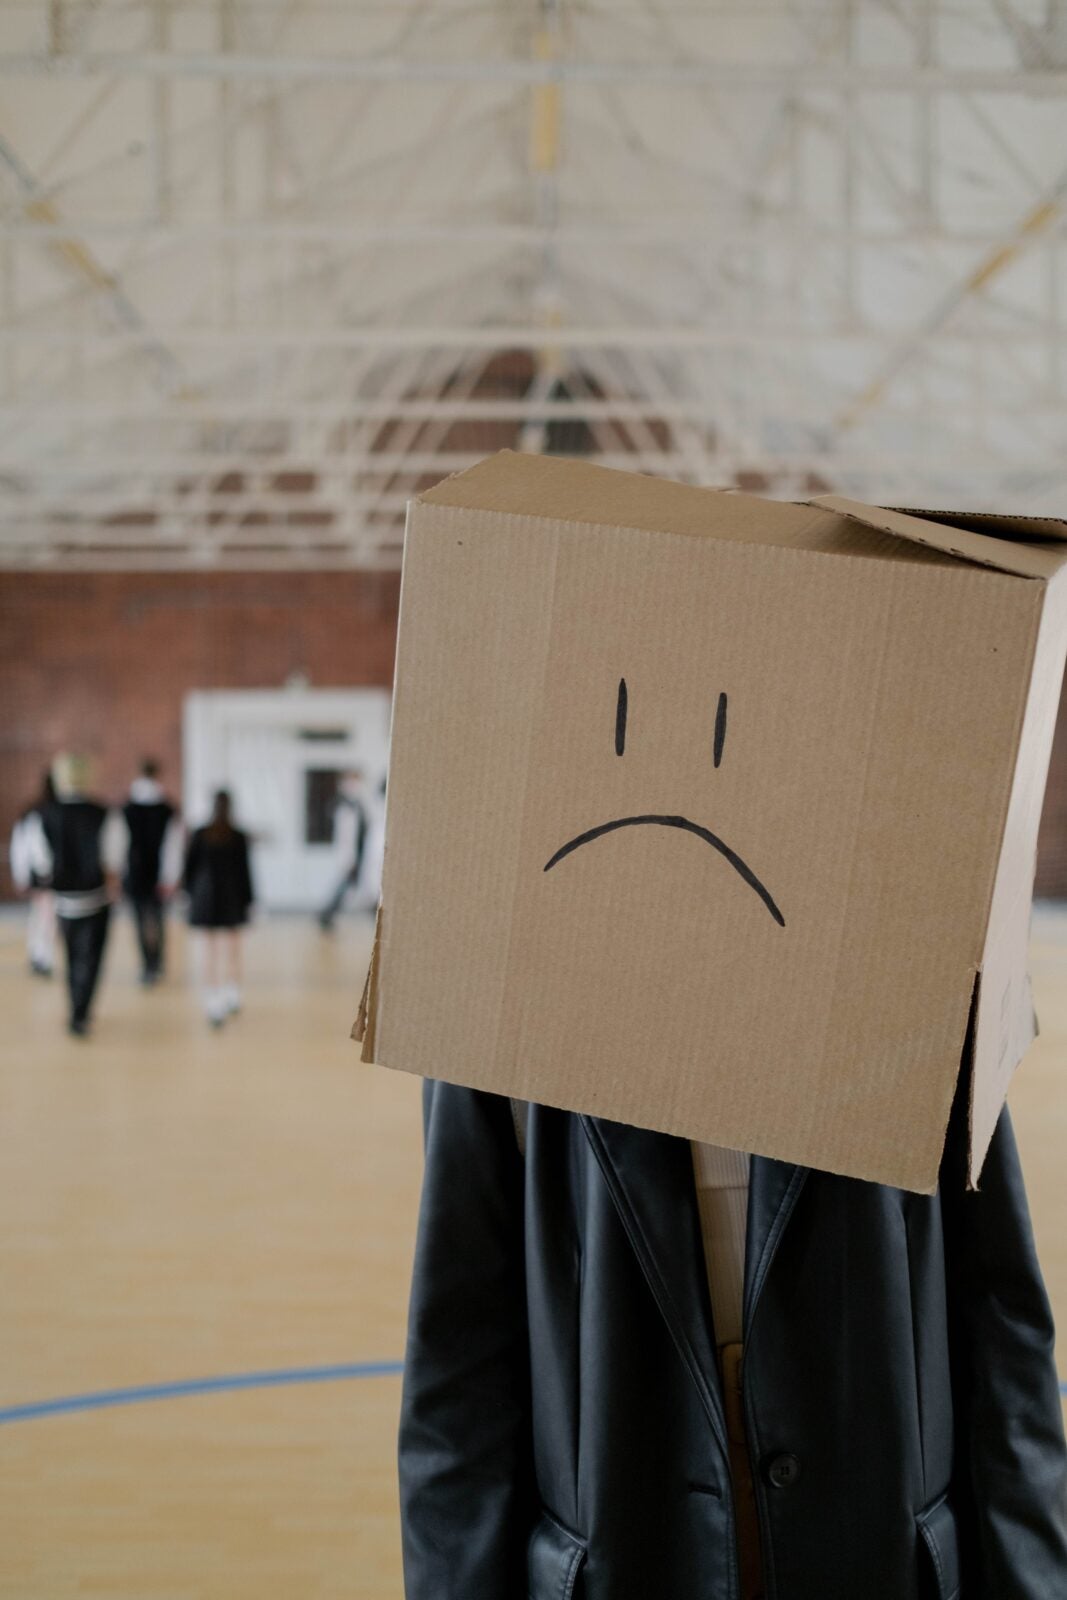 A man with a box over his head standing in an indoor school gym. The box has a sad face drawn on it.